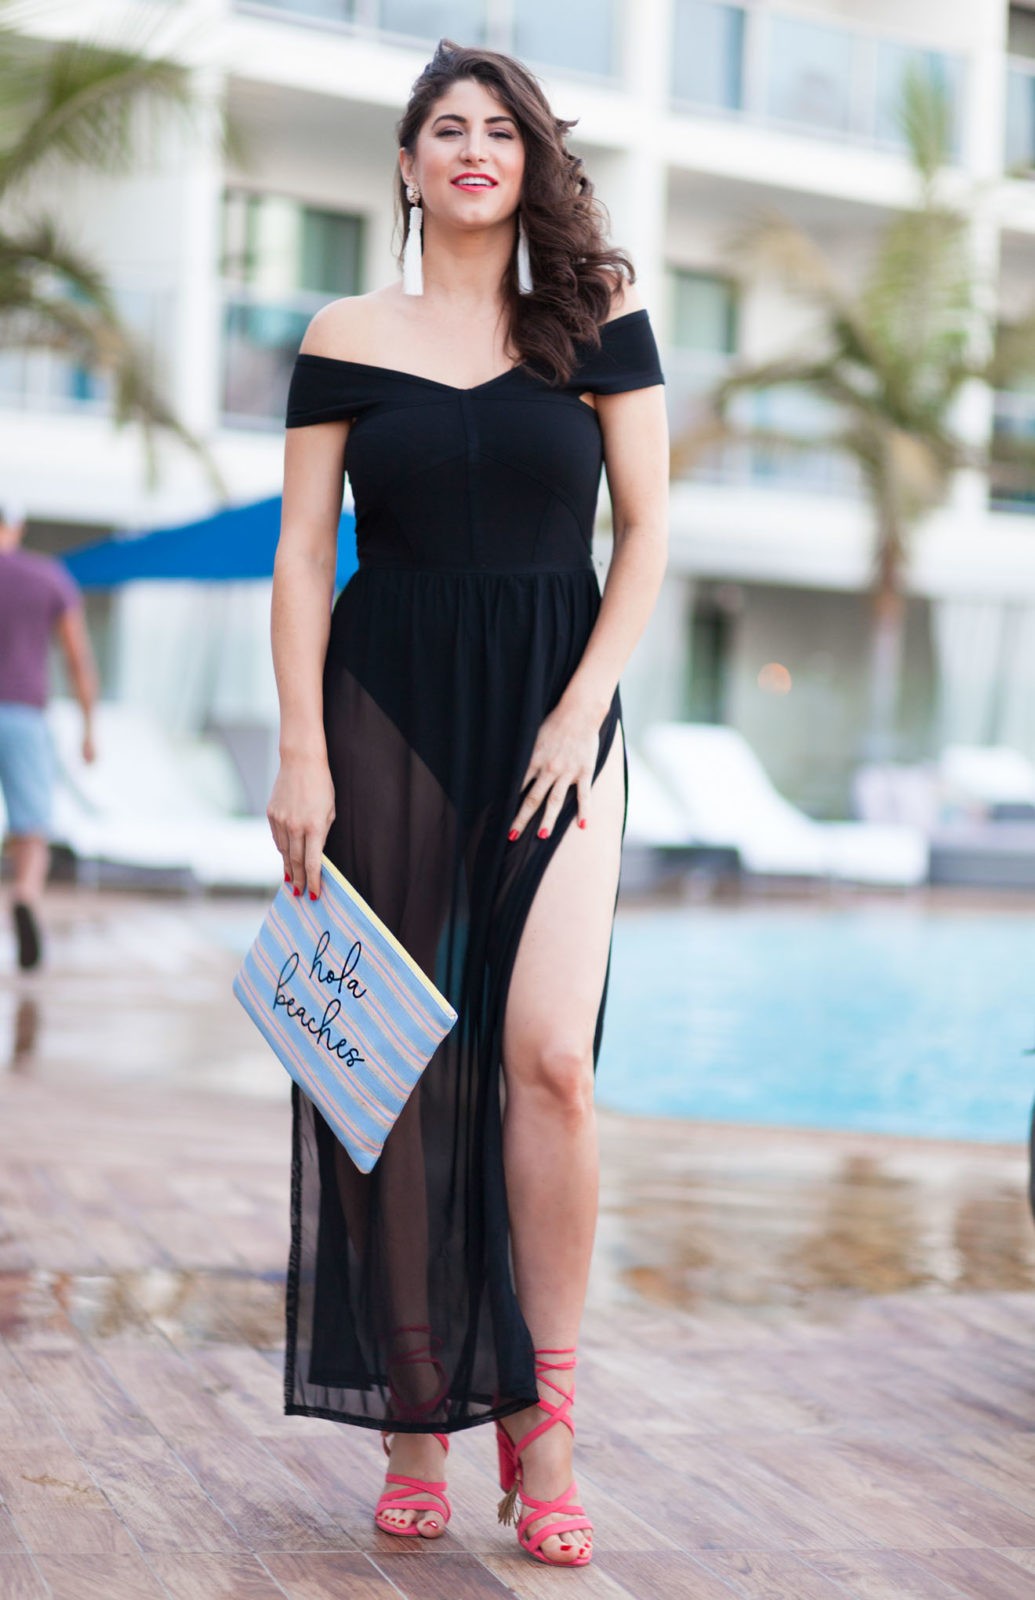 Laura Lily Fashion Travel and Lifestyle Blog, Styling sheer fabrics with Express, 